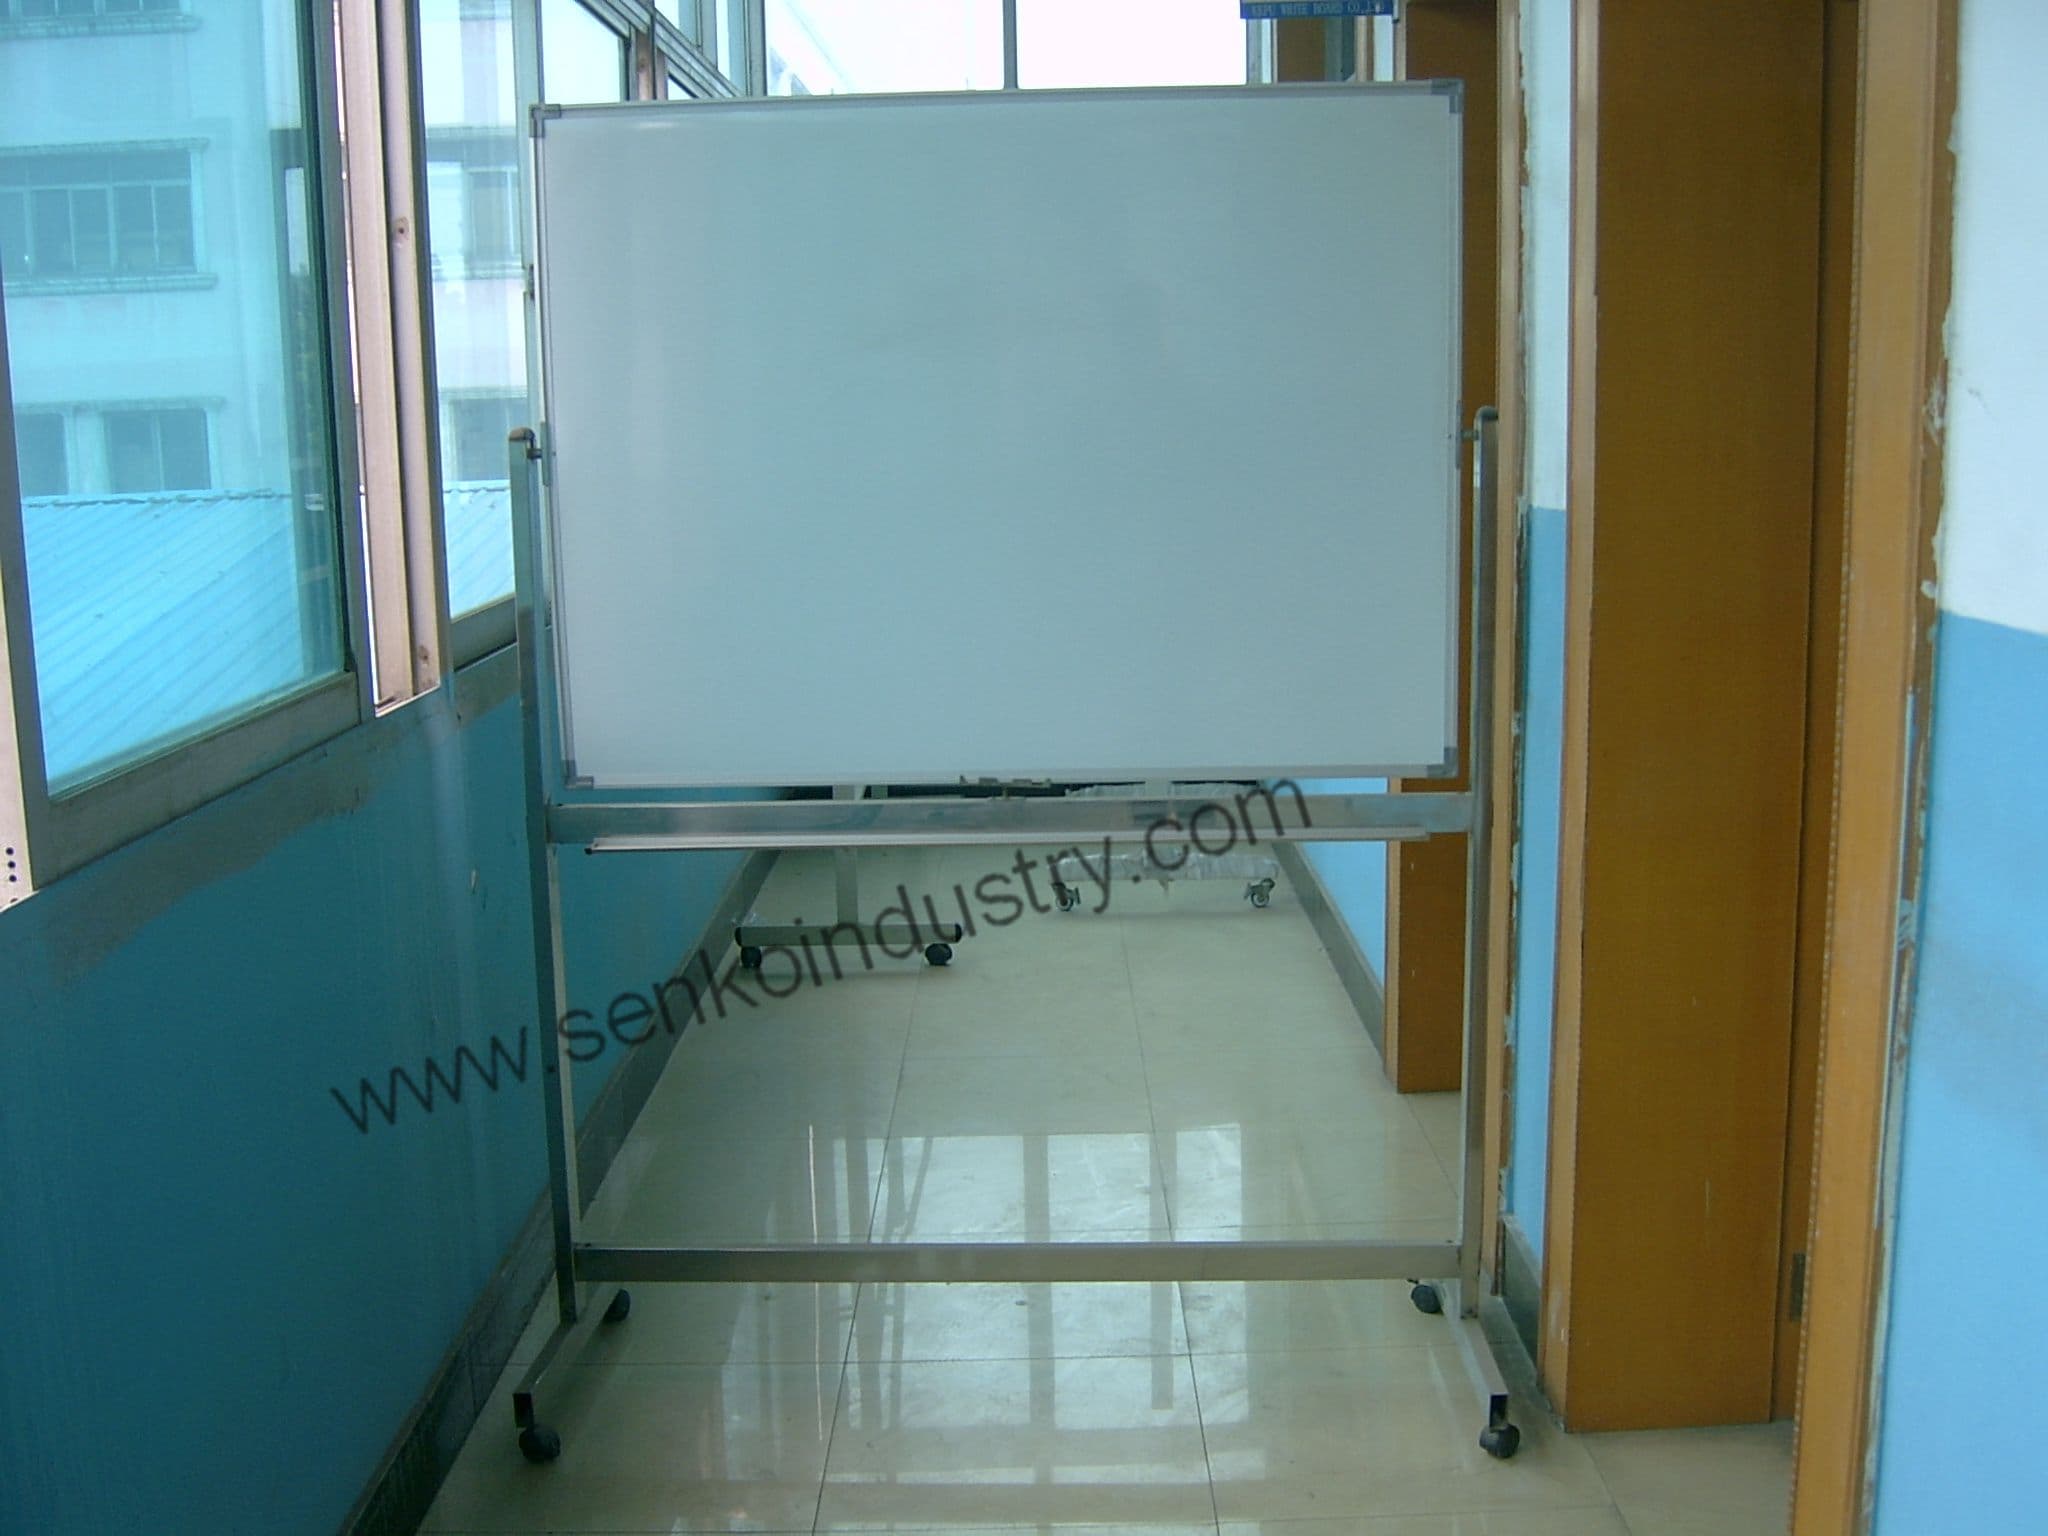 Magnetic Writing Board for School with High Quality